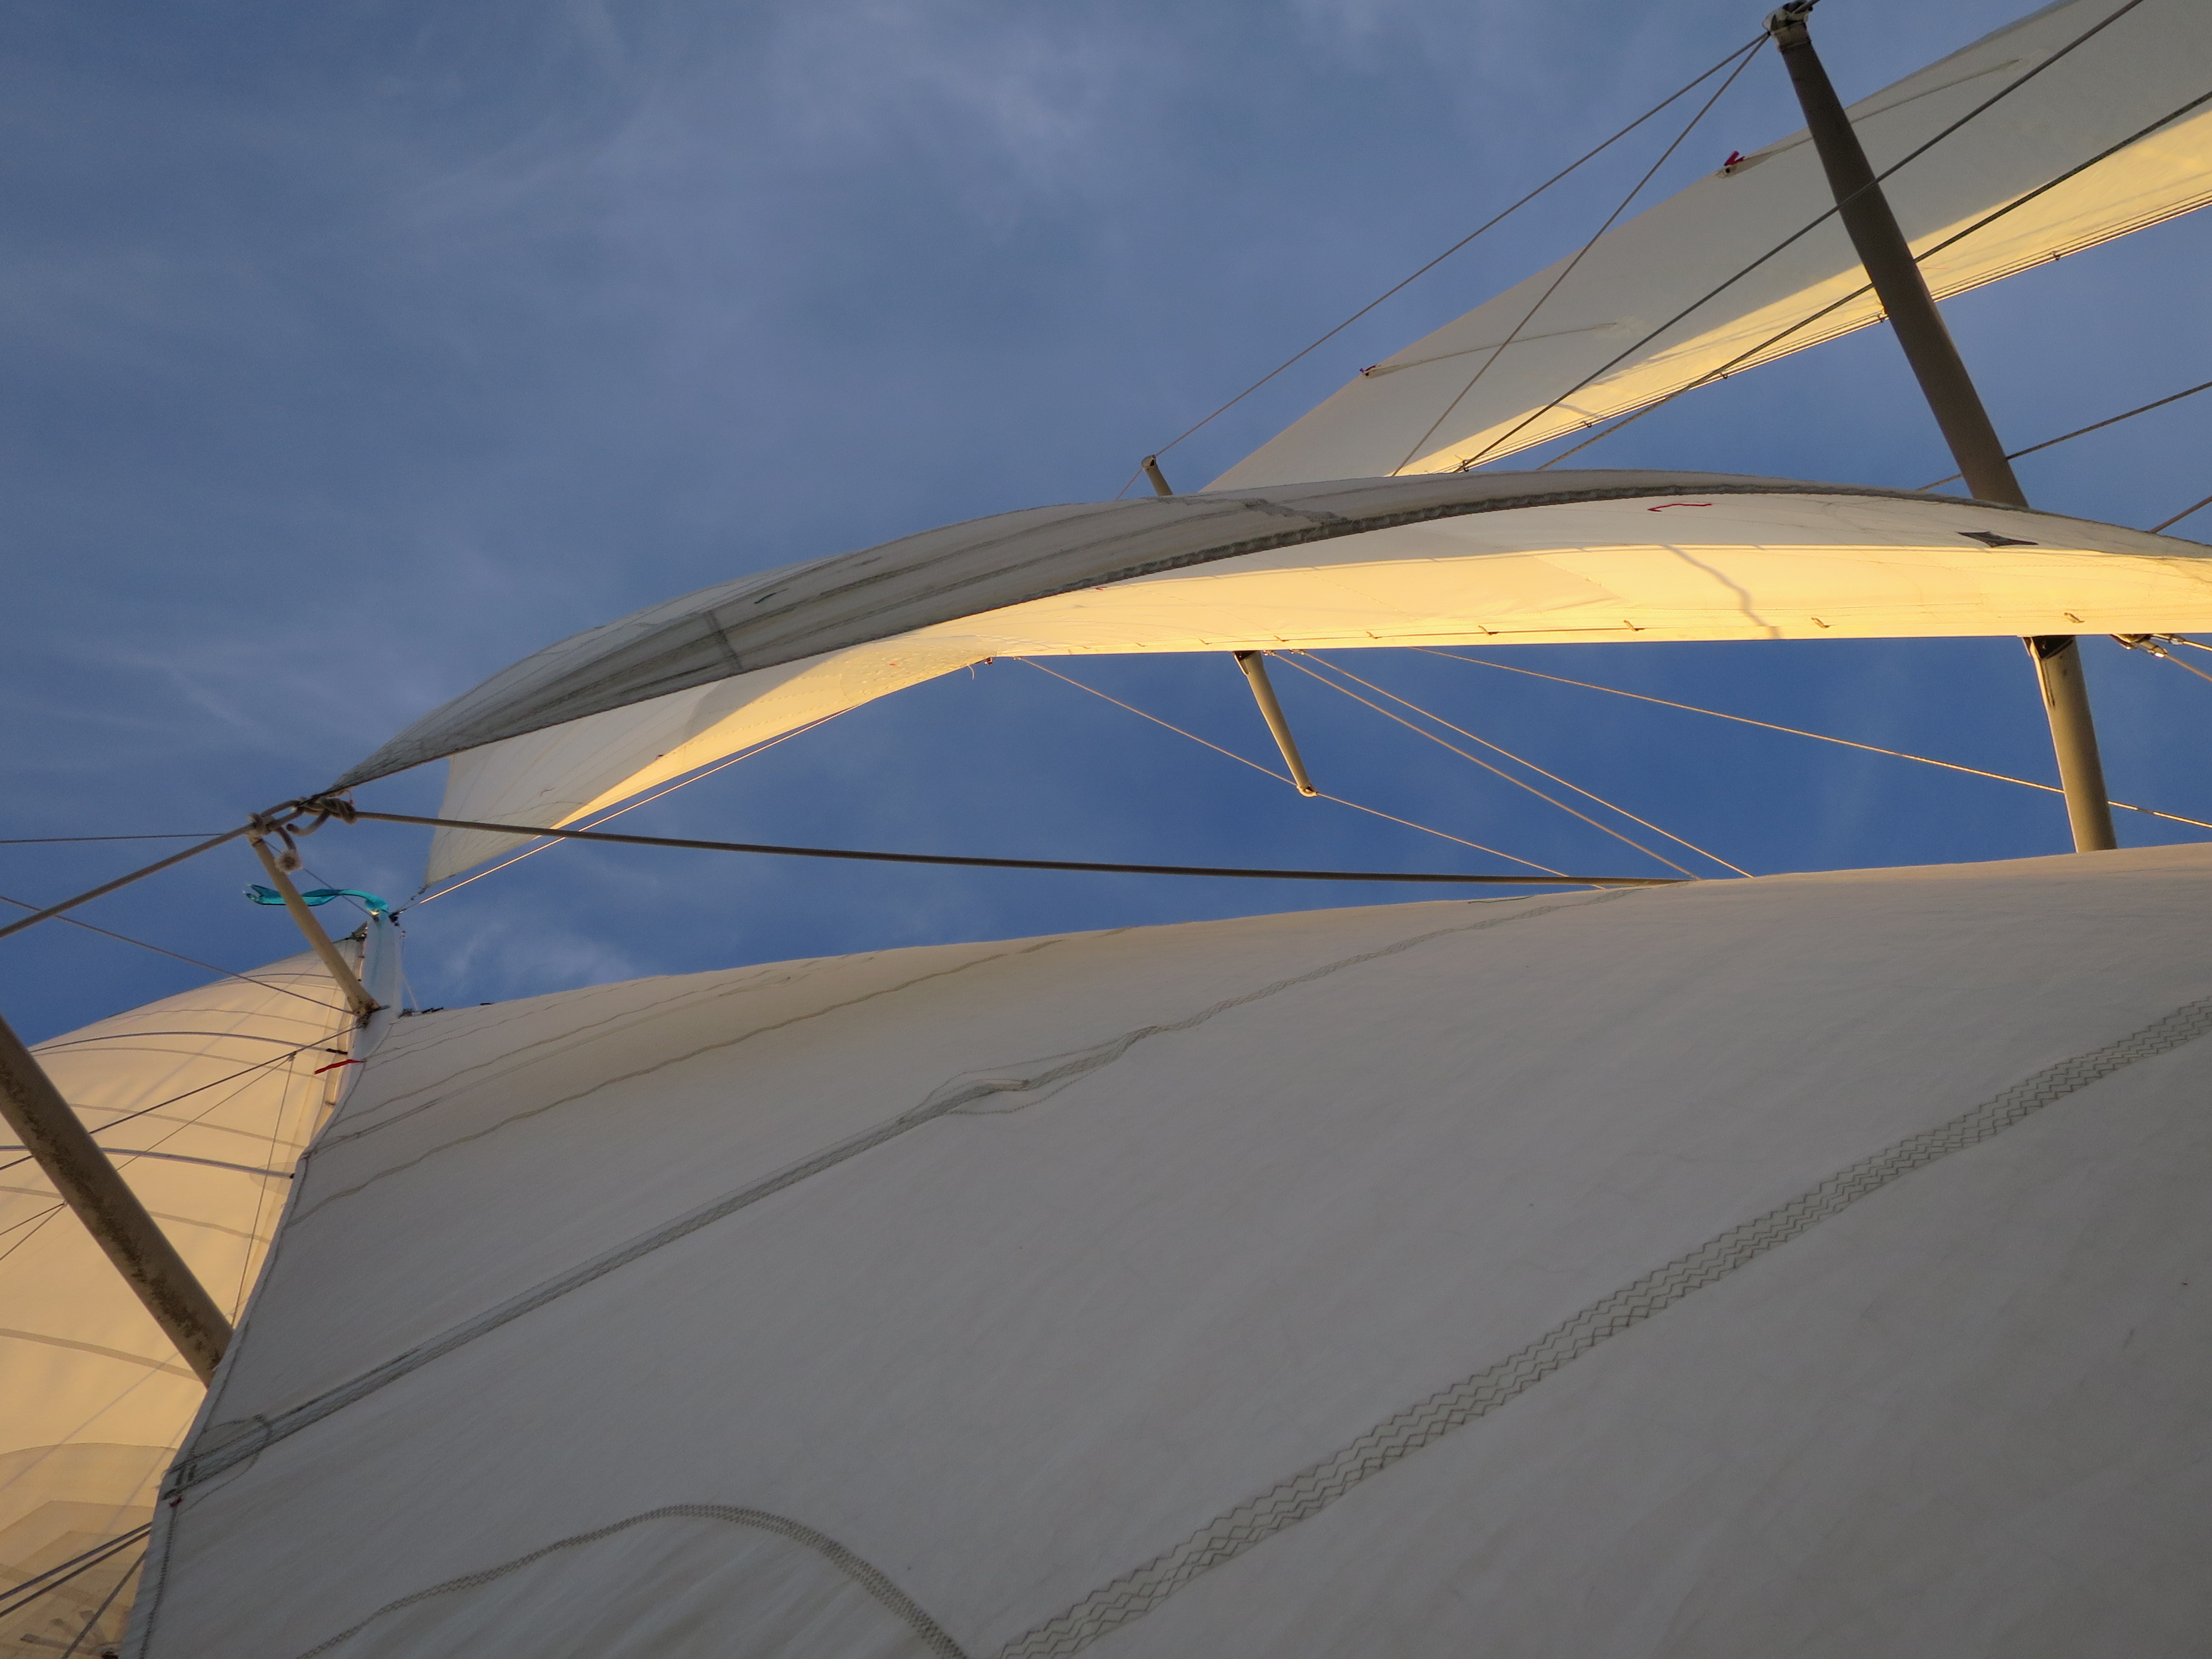 Looking straight up through the sails to blue sky